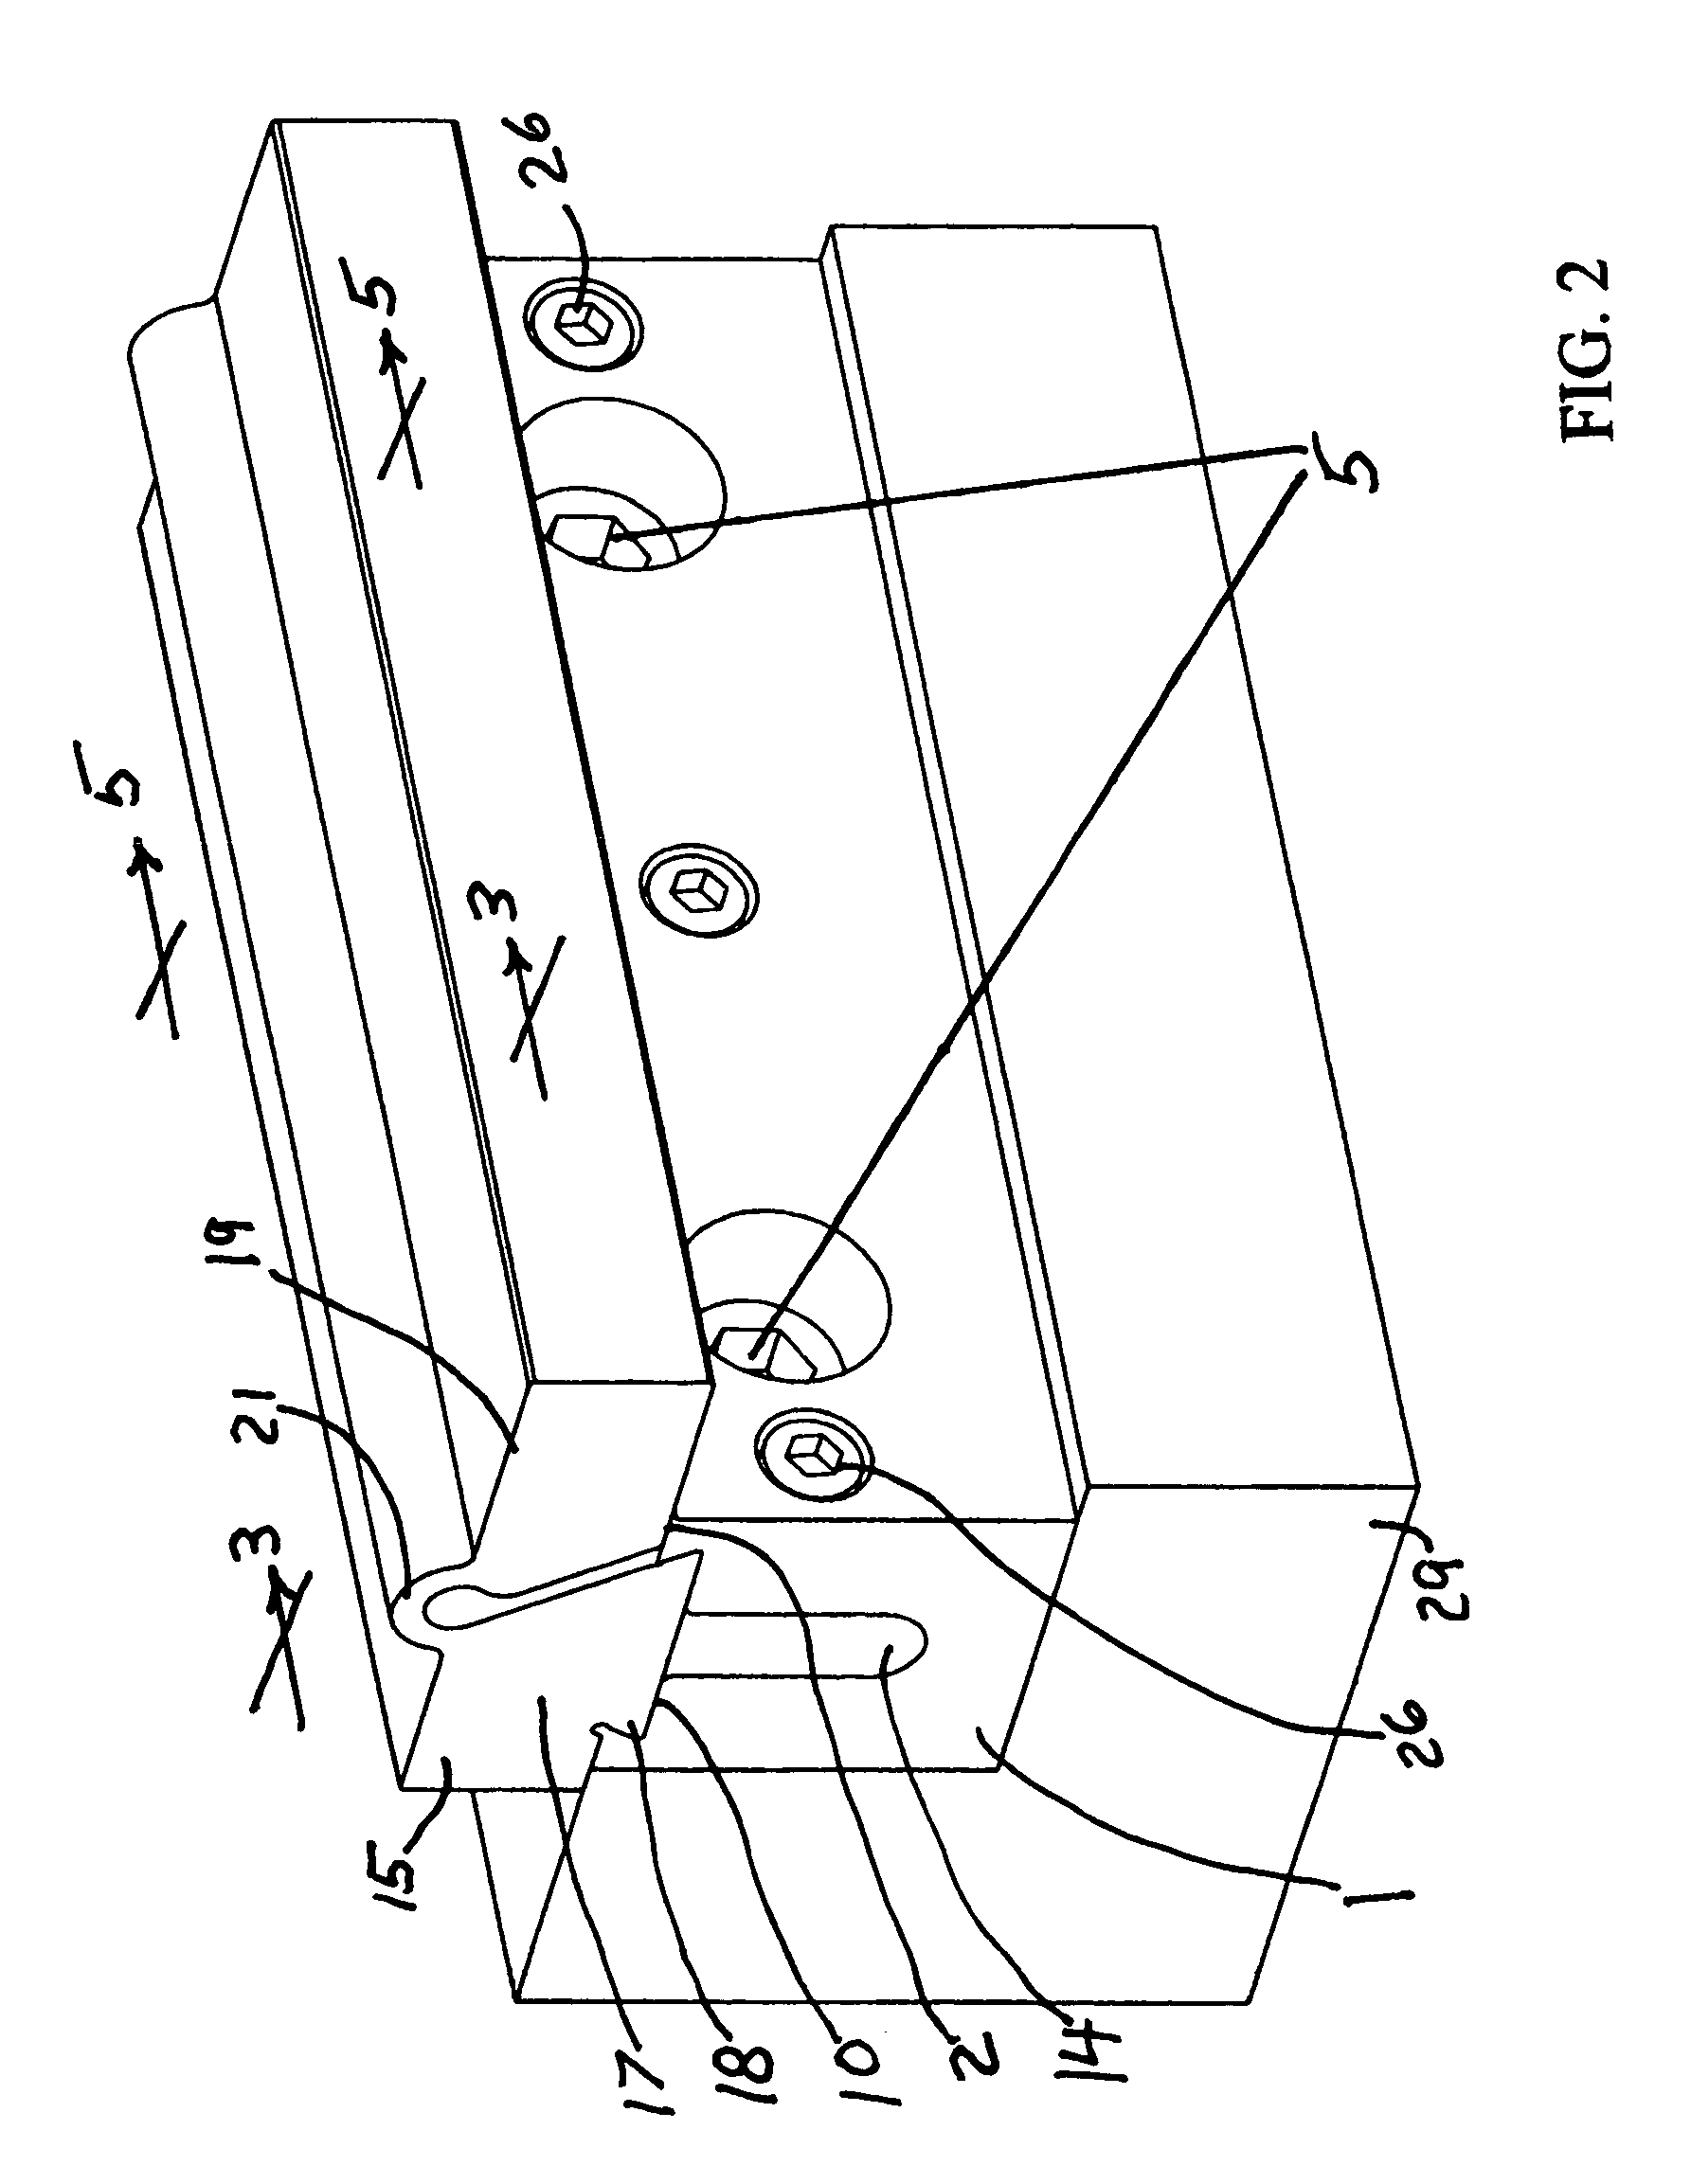 Segmentable resilient vise jaw